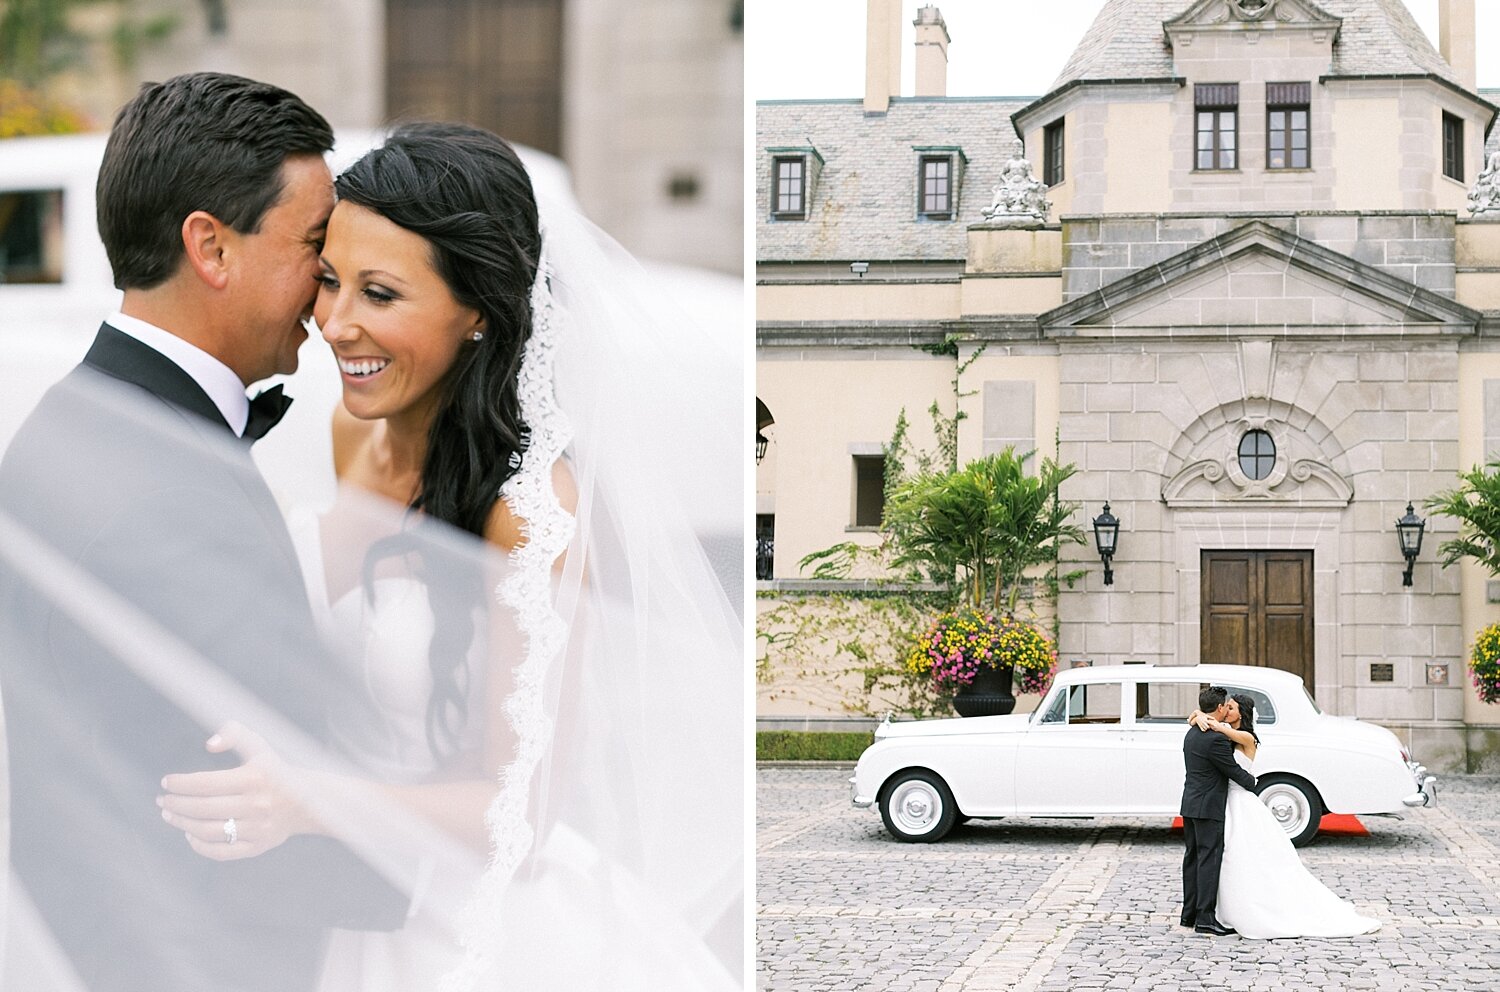 New York wedding day photographed by Asher Gardner Photography